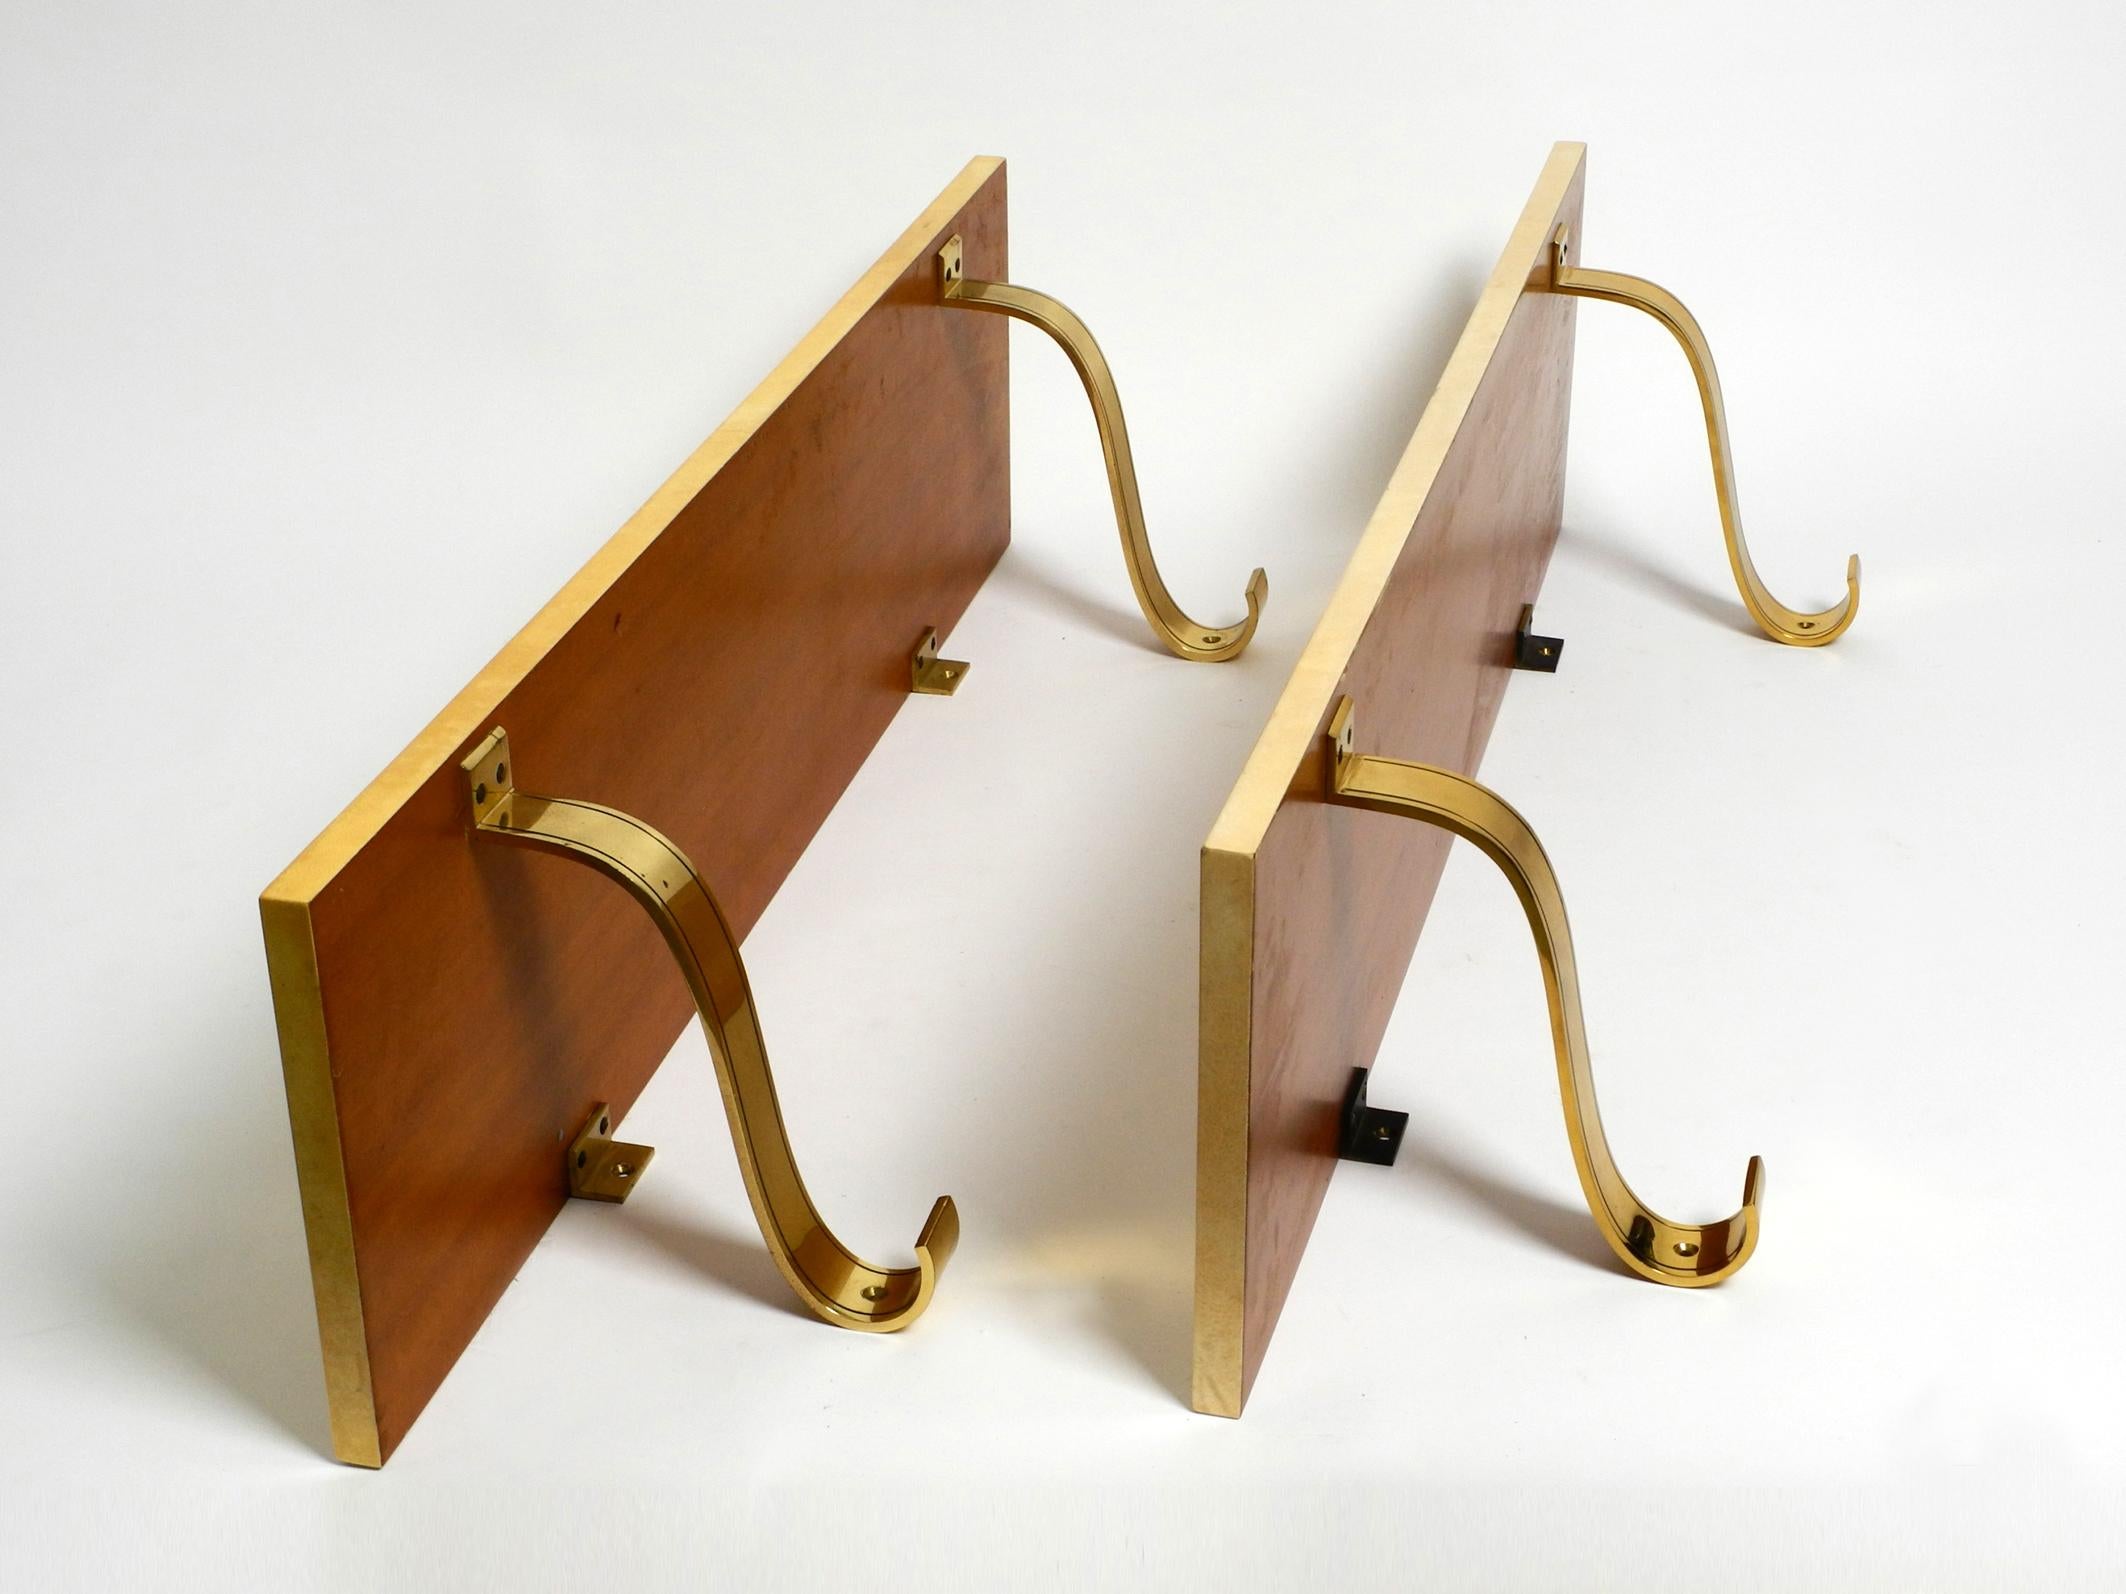 Two Beautiful, Very Rare 1960s Large Aldo Tura Shelves Made of Wood and Goatskin For Sale 7